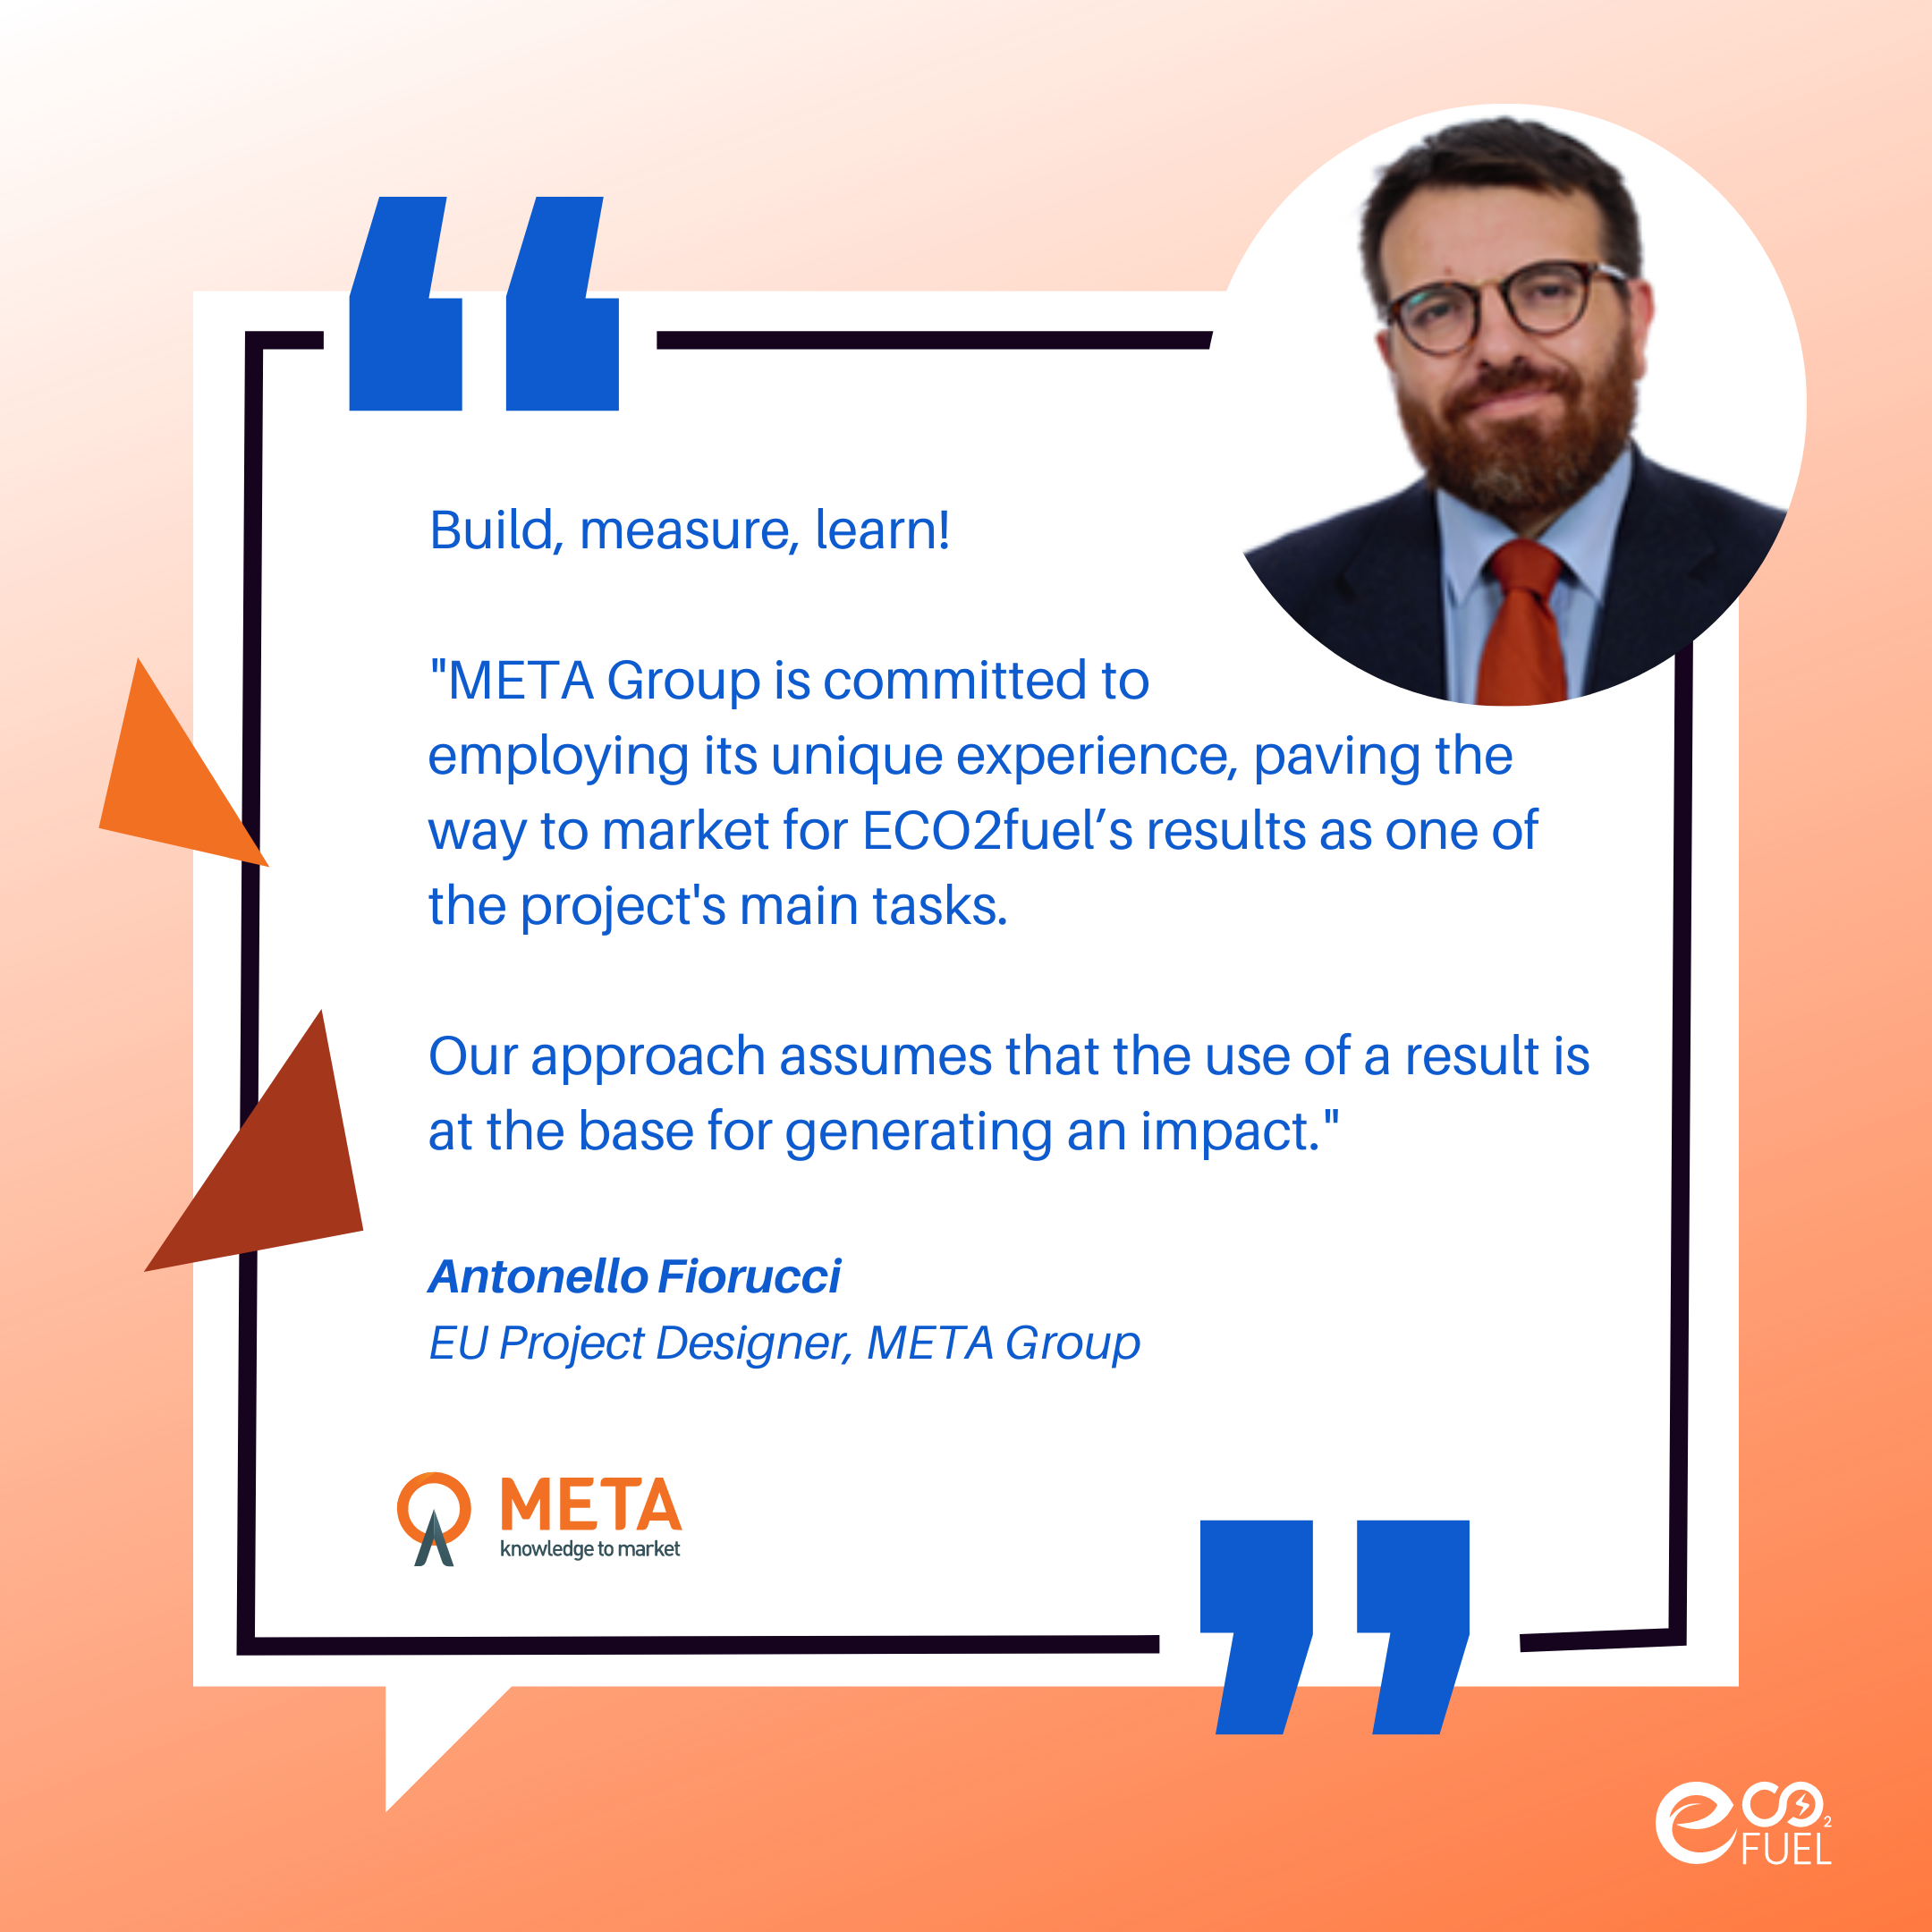 Antonello Fiorucci, EU Project Designer at META Group, say: „META Group is committed to employing its unique experience, paving the way to market for ECO2fuel’s results as one of the main tasks of the project. Our approach assumes that the use of a result is at the base for generating an impact.“